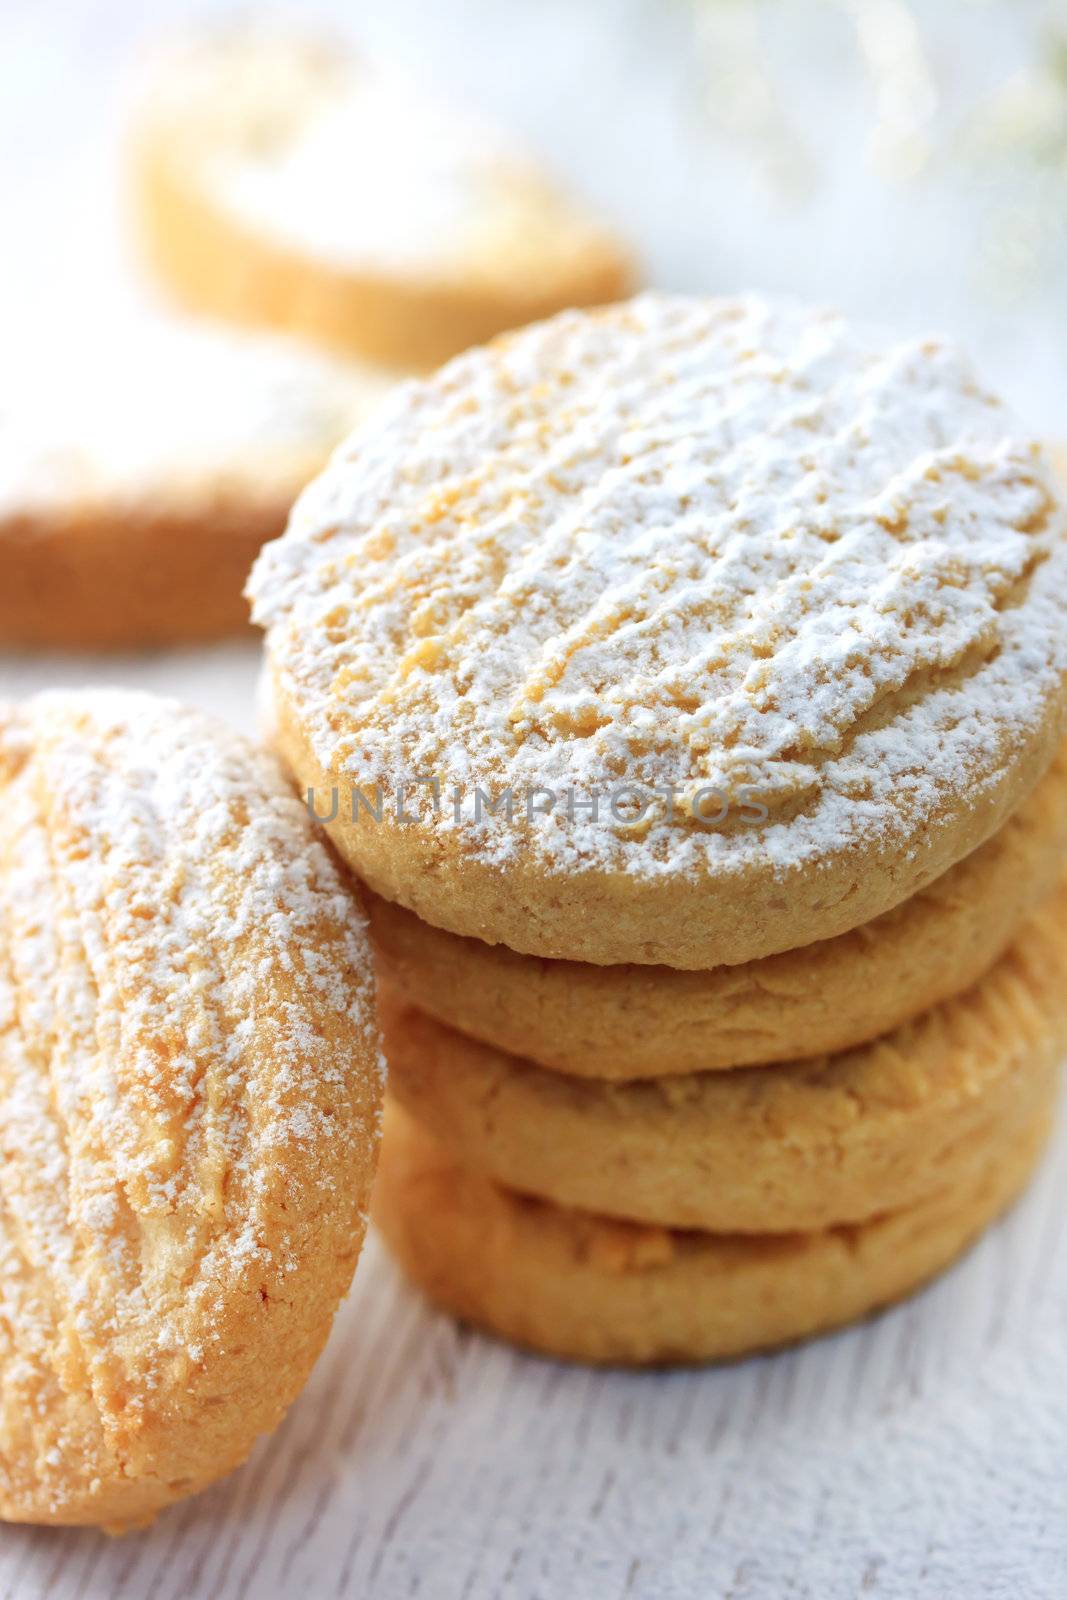 Cookies with powdered sugar  by melpomene